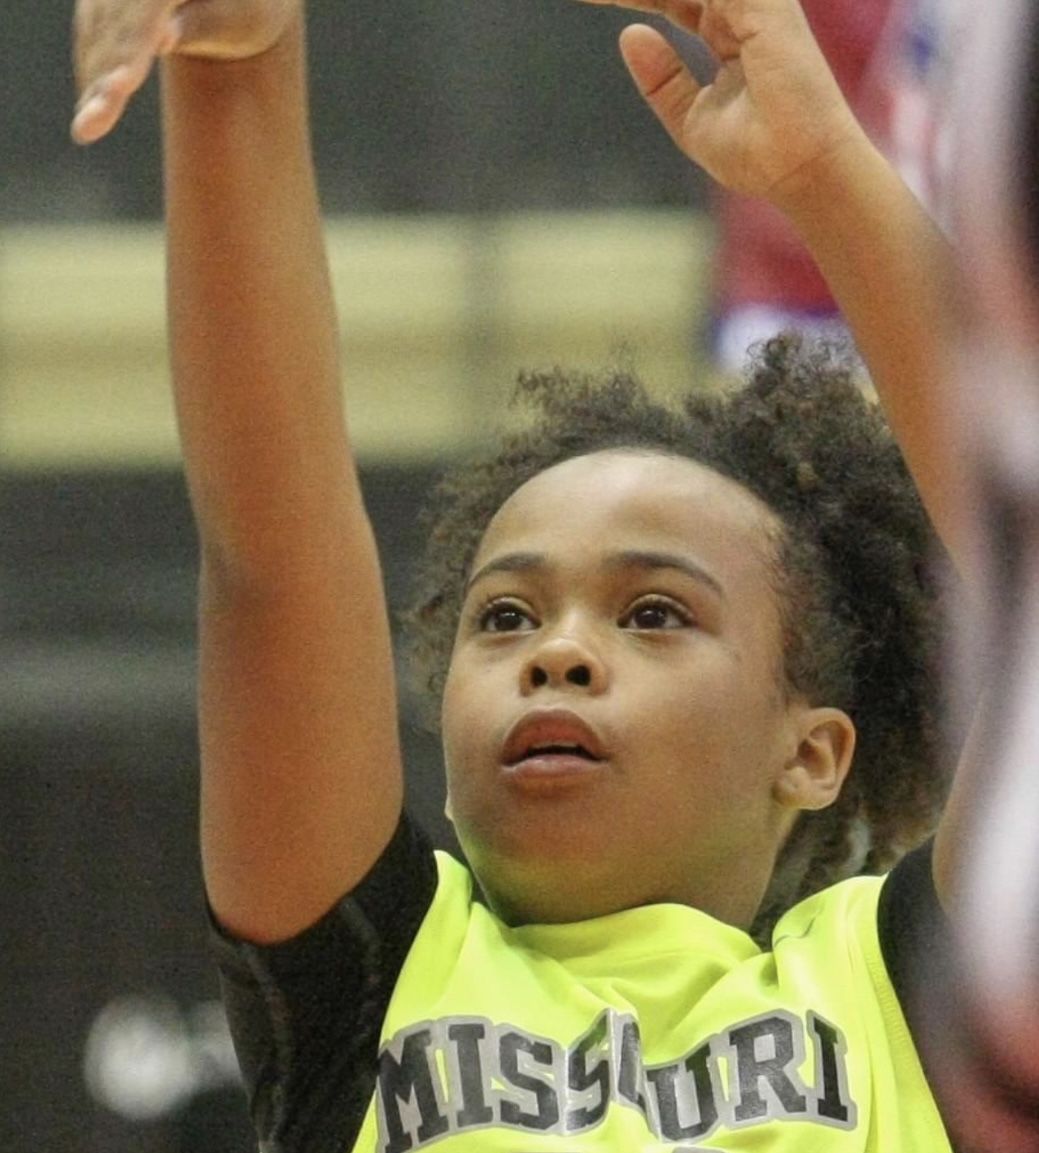 Photo shows a young Xamiya shooting a basketball. She is wearing a bright neon green jersey that says "Missouri Elite" with the number 24 on it.